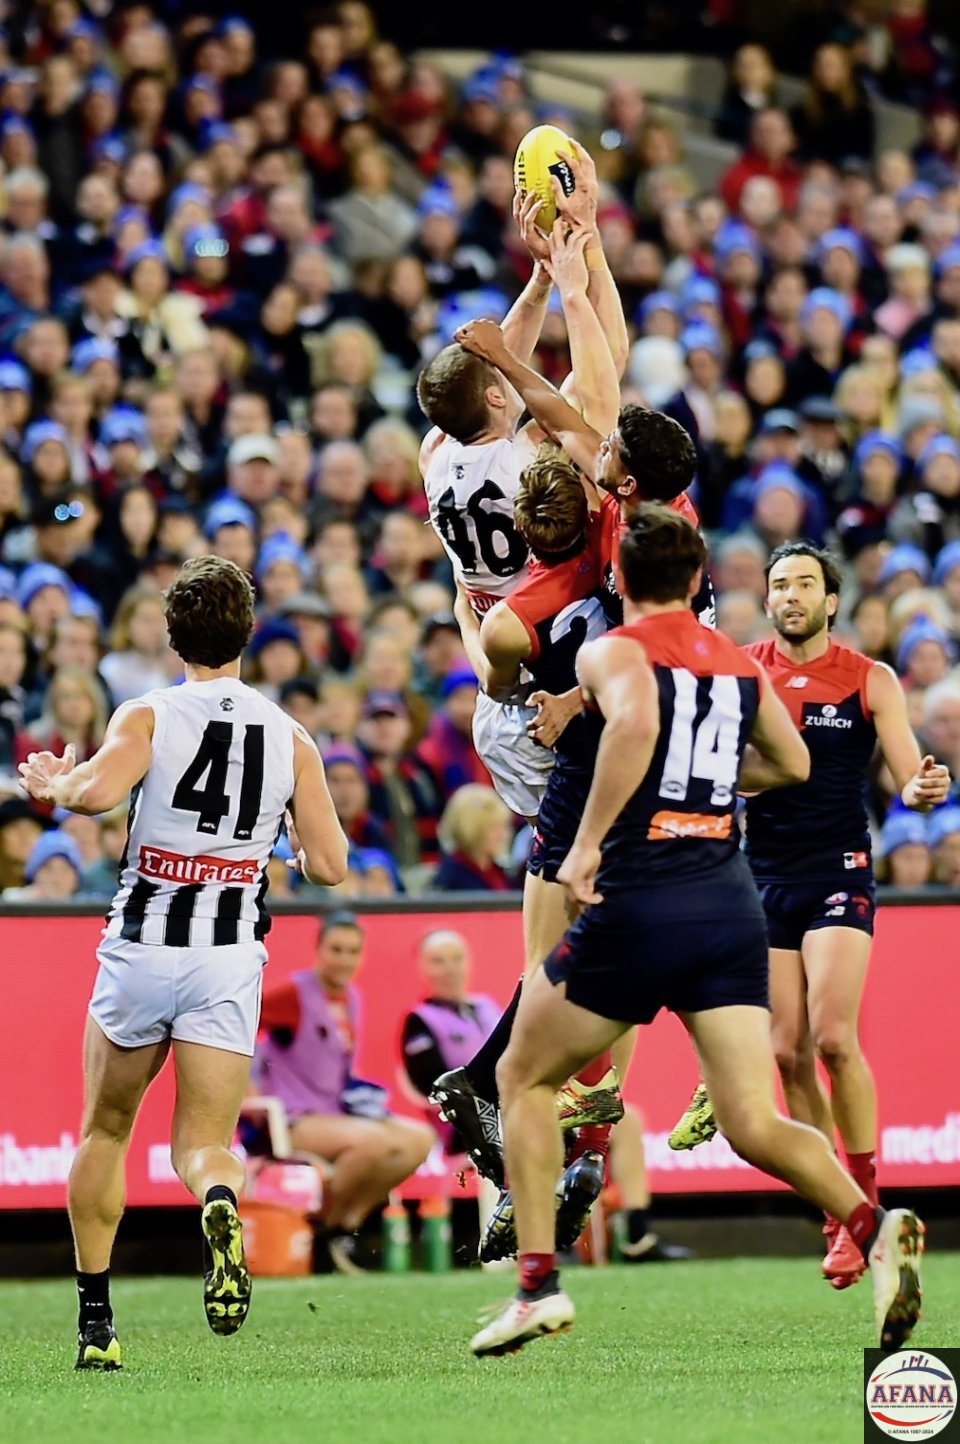 Mason Cox outreaches the Dees in a marking contest